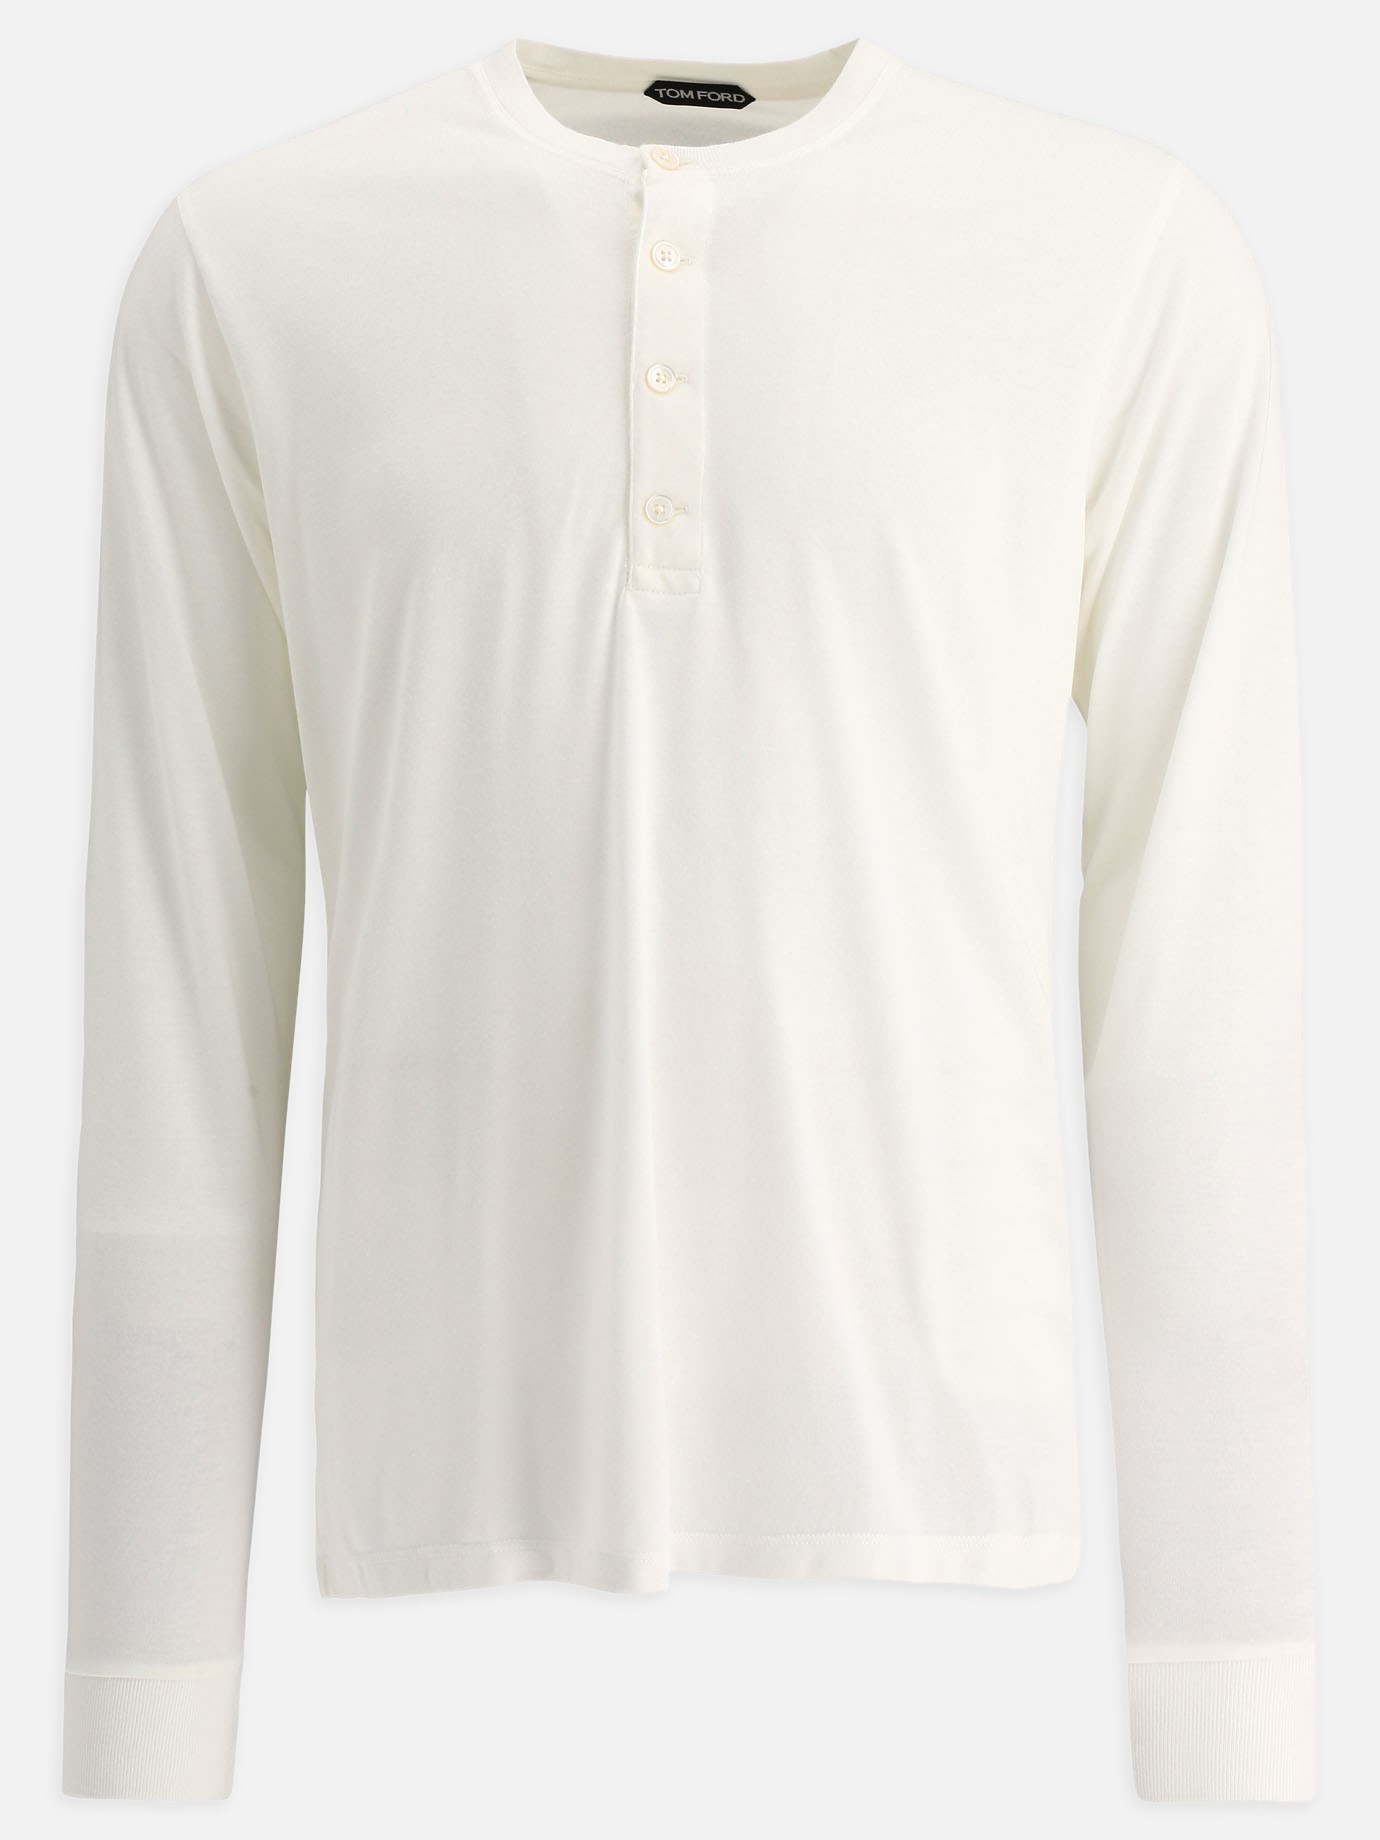  Henley  t-shirt by Tom Ford